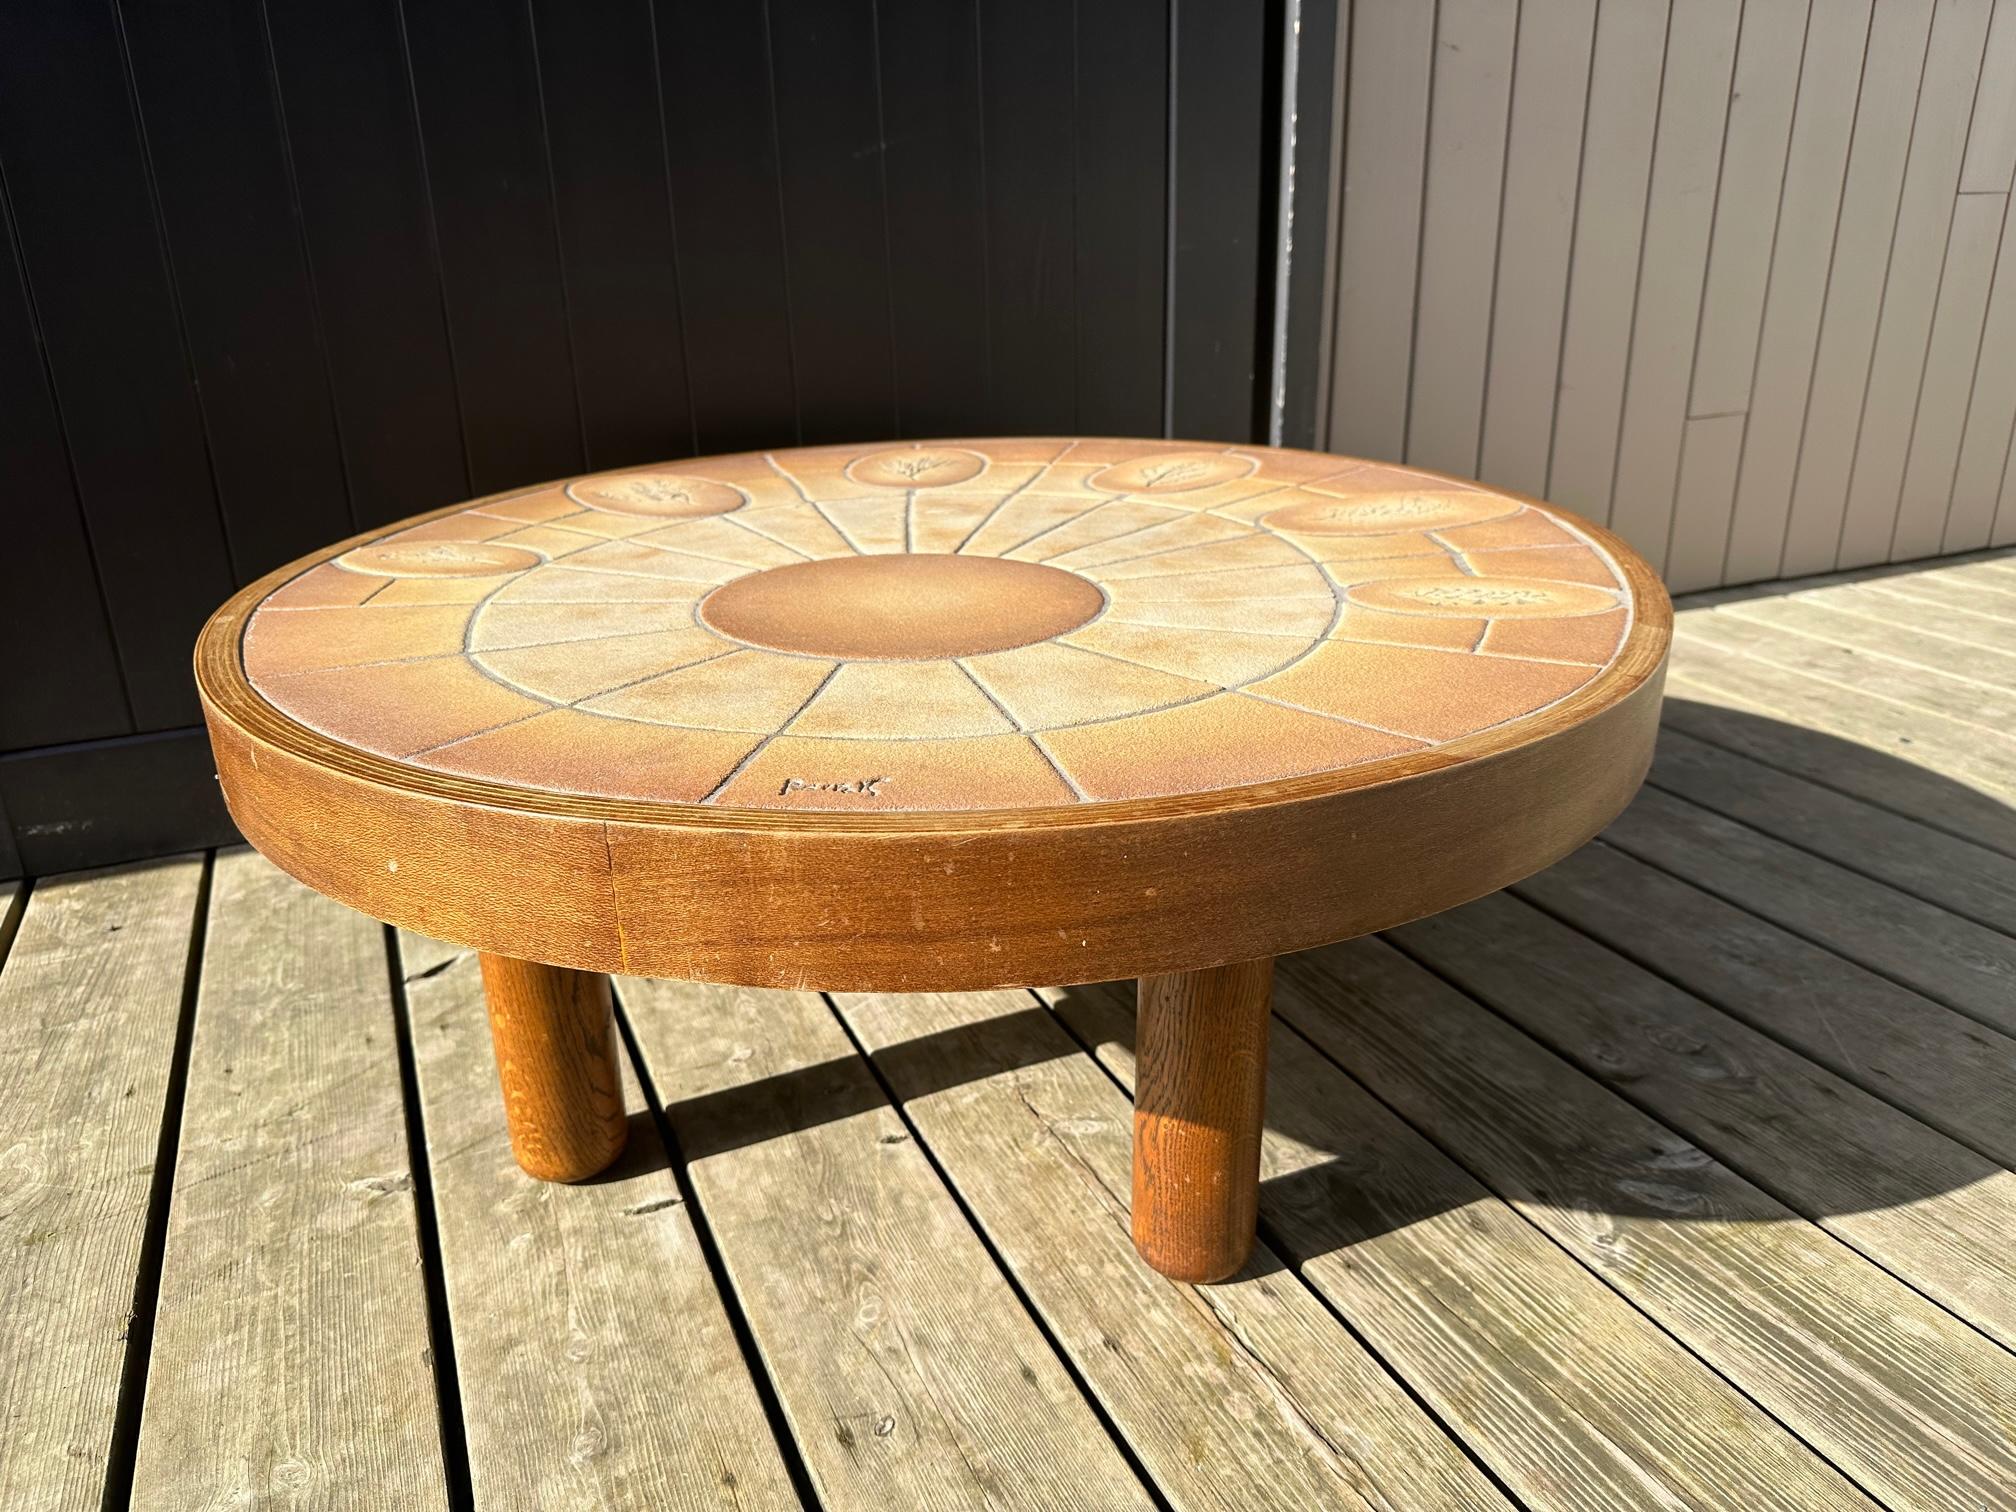 20th century French Vallauris Ceramic and Oak Coffee Table, 1960s For Sale 5